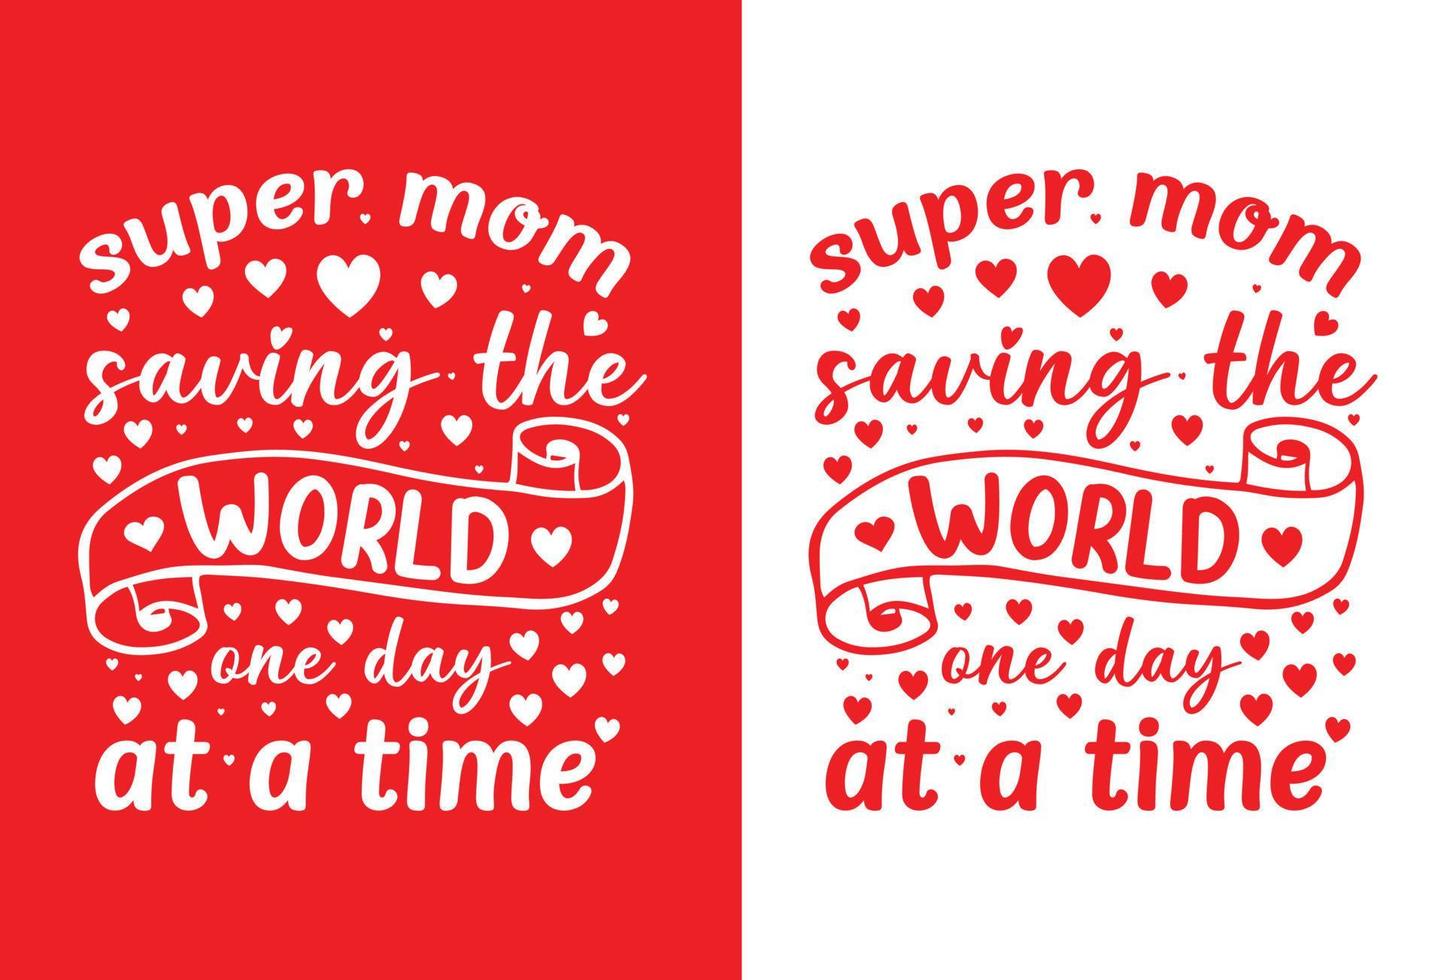 Happy Mothers Day T shirt free, Mothers day t shirt bundle, mothers day t shirt vector, mothers day element vector, lettering mom t shirt vector